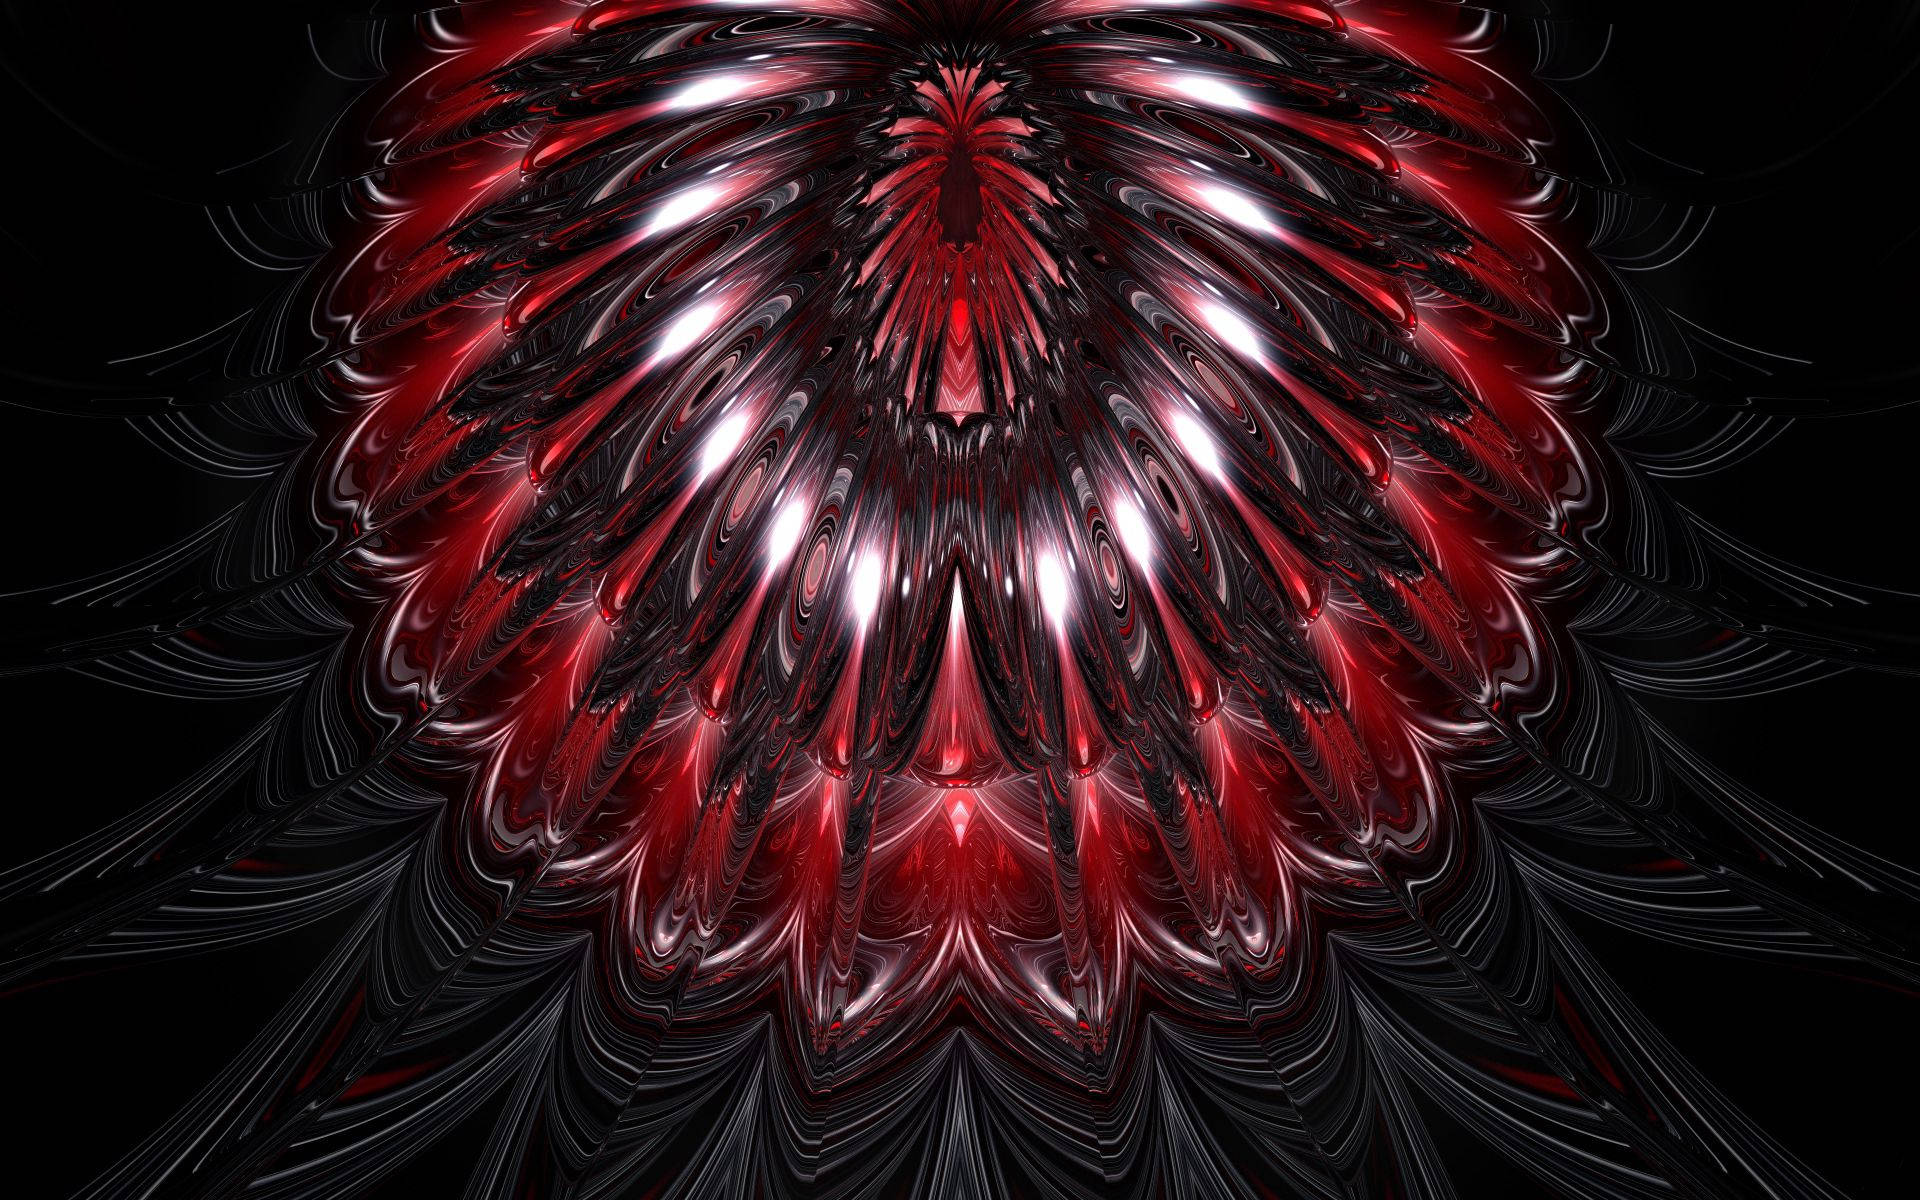 A Red And Black Abstract Design On A Black Background Wallpaper